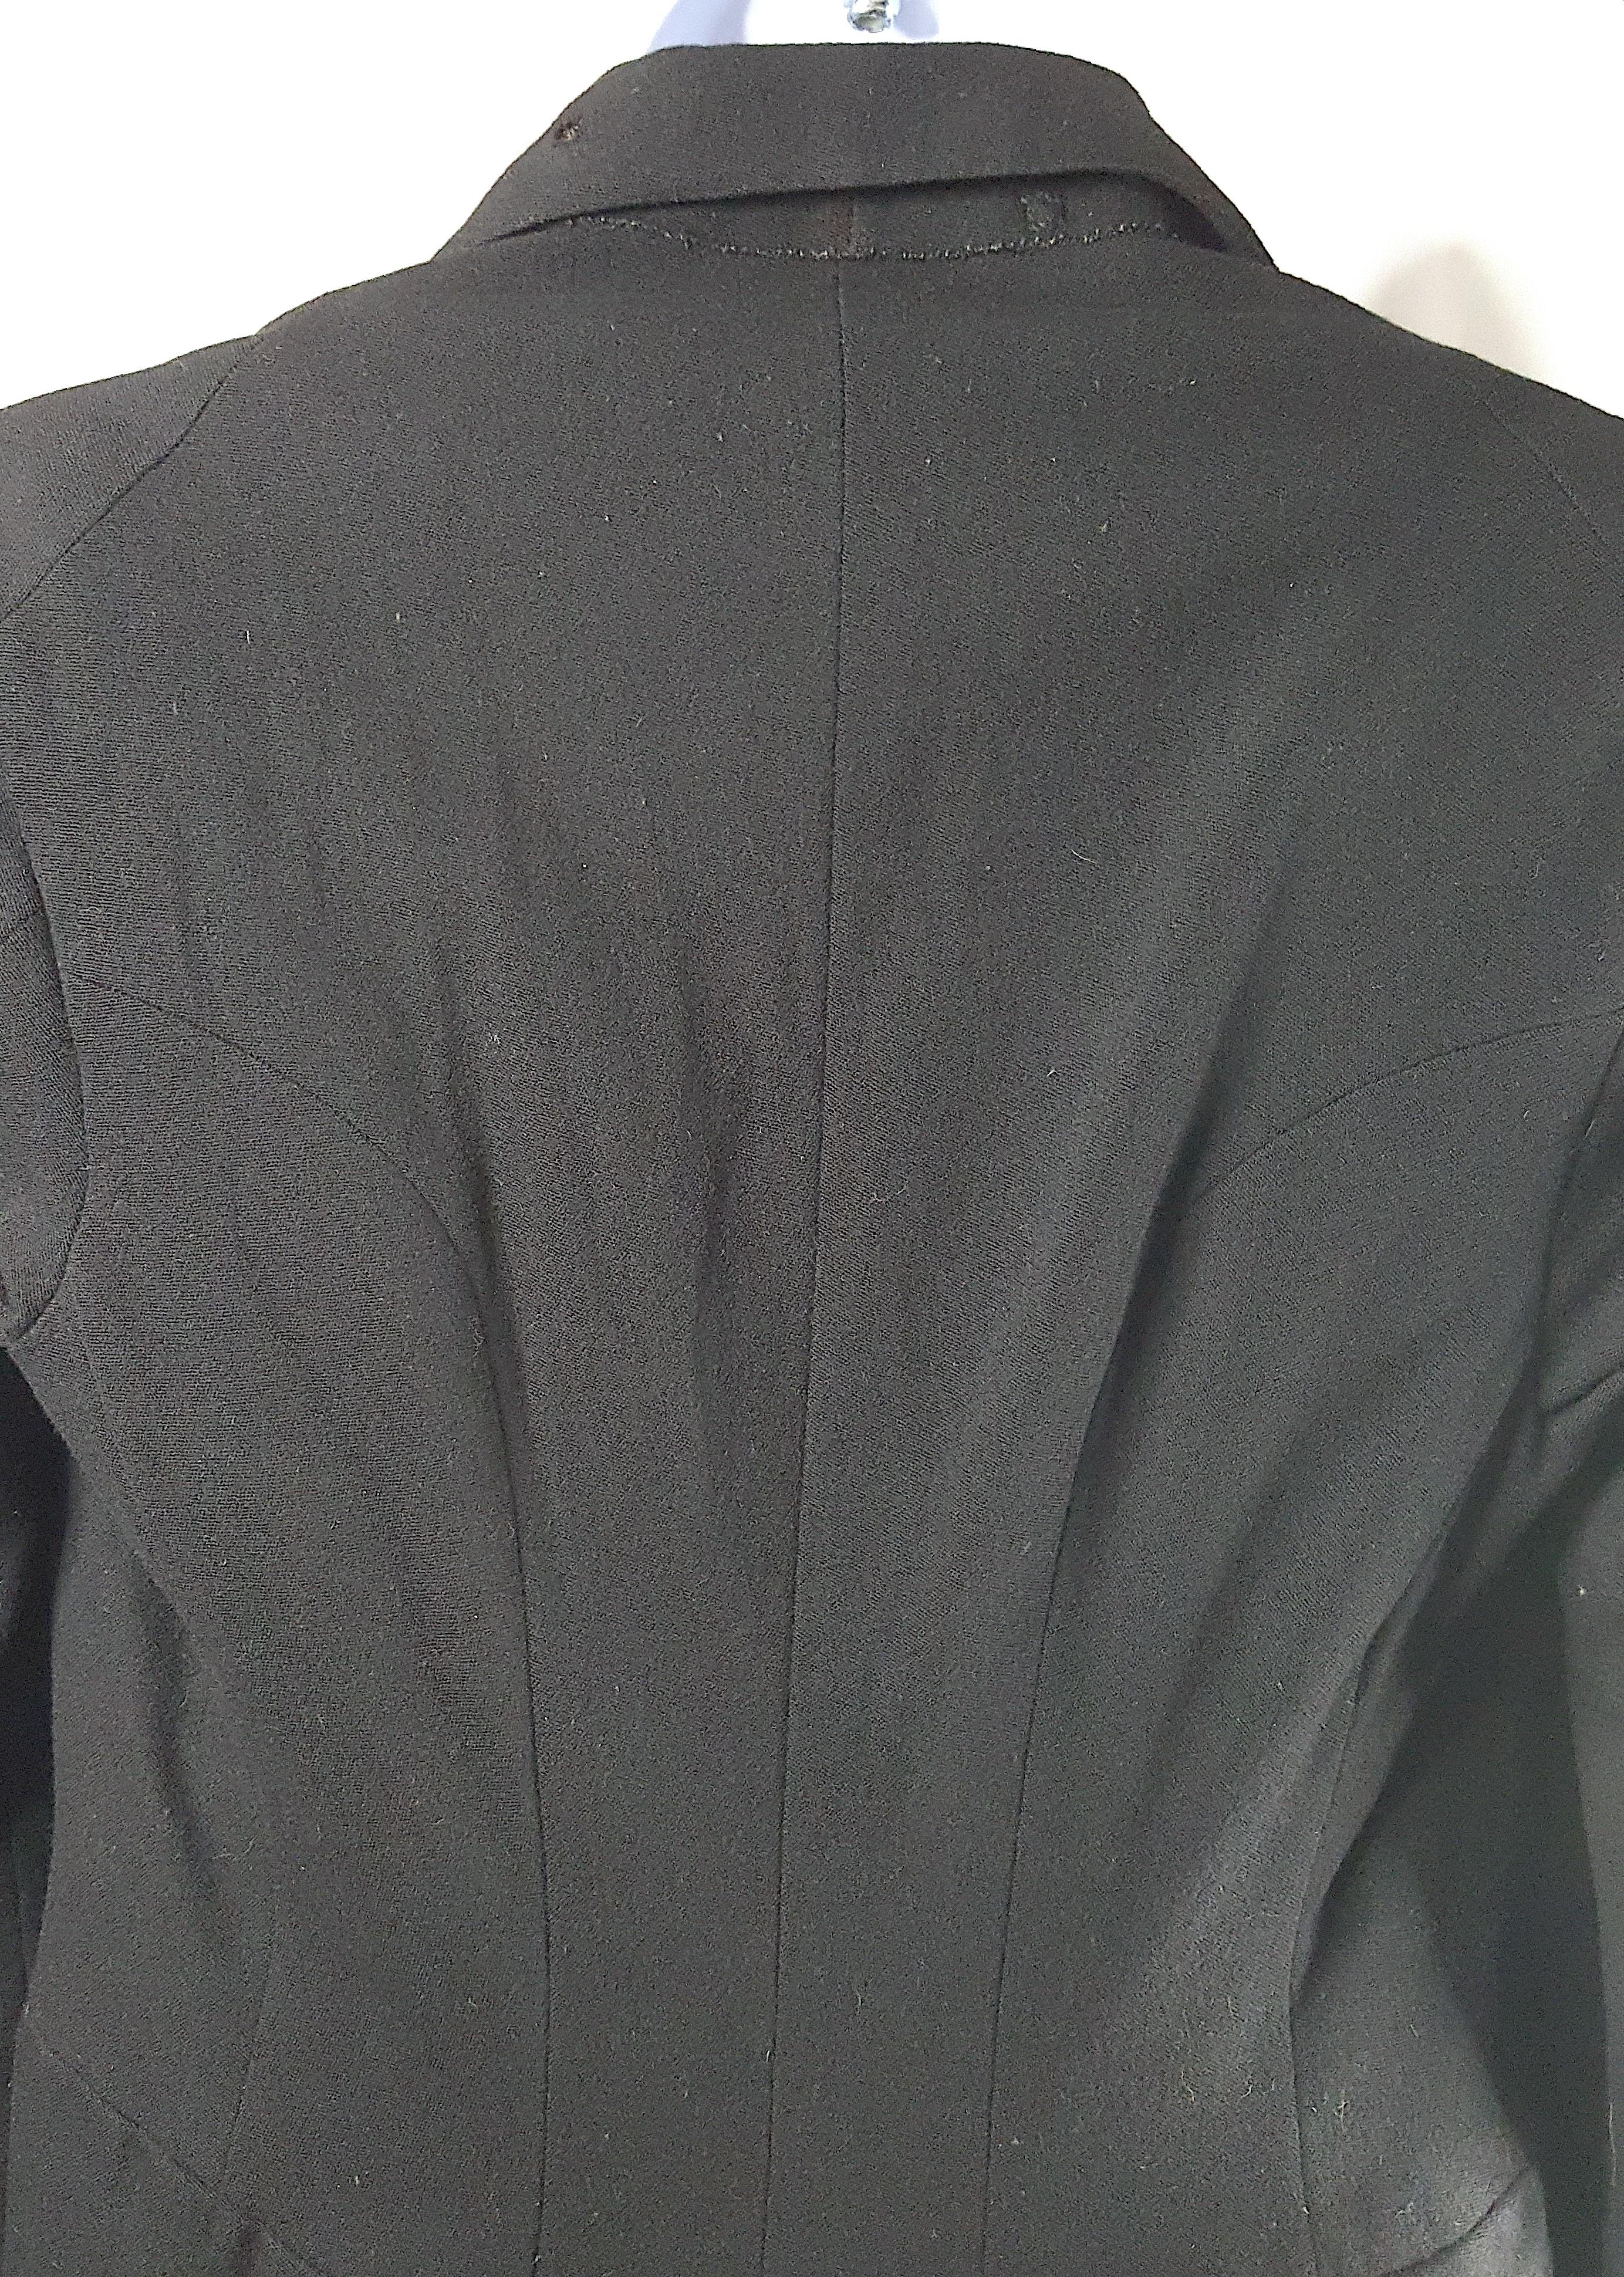 Couture Antique Tuxedo Wool Ribbed&QuiltedSatin FullyLined&Padded Black Tailcoat For Sale 2